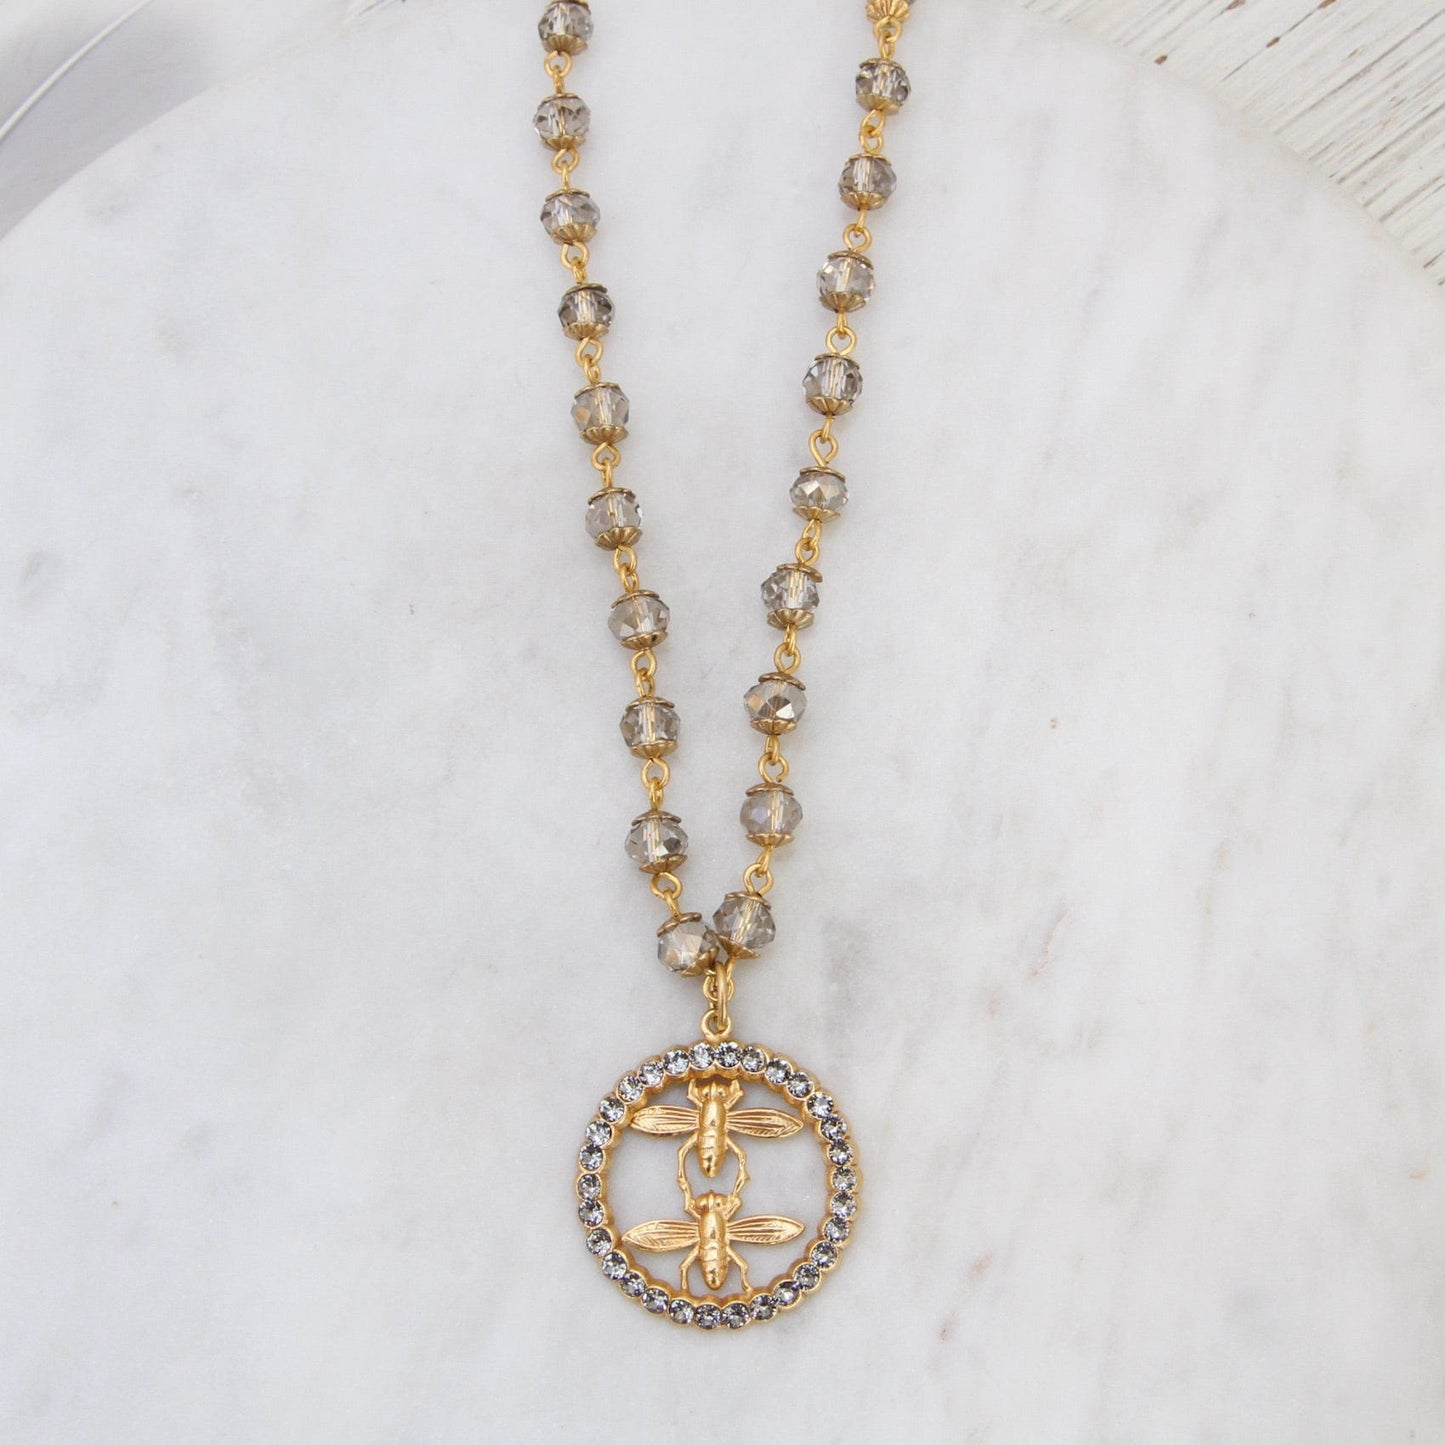 NKL-JM Double Bee Pendant with Crystal Circle - Gold Plate